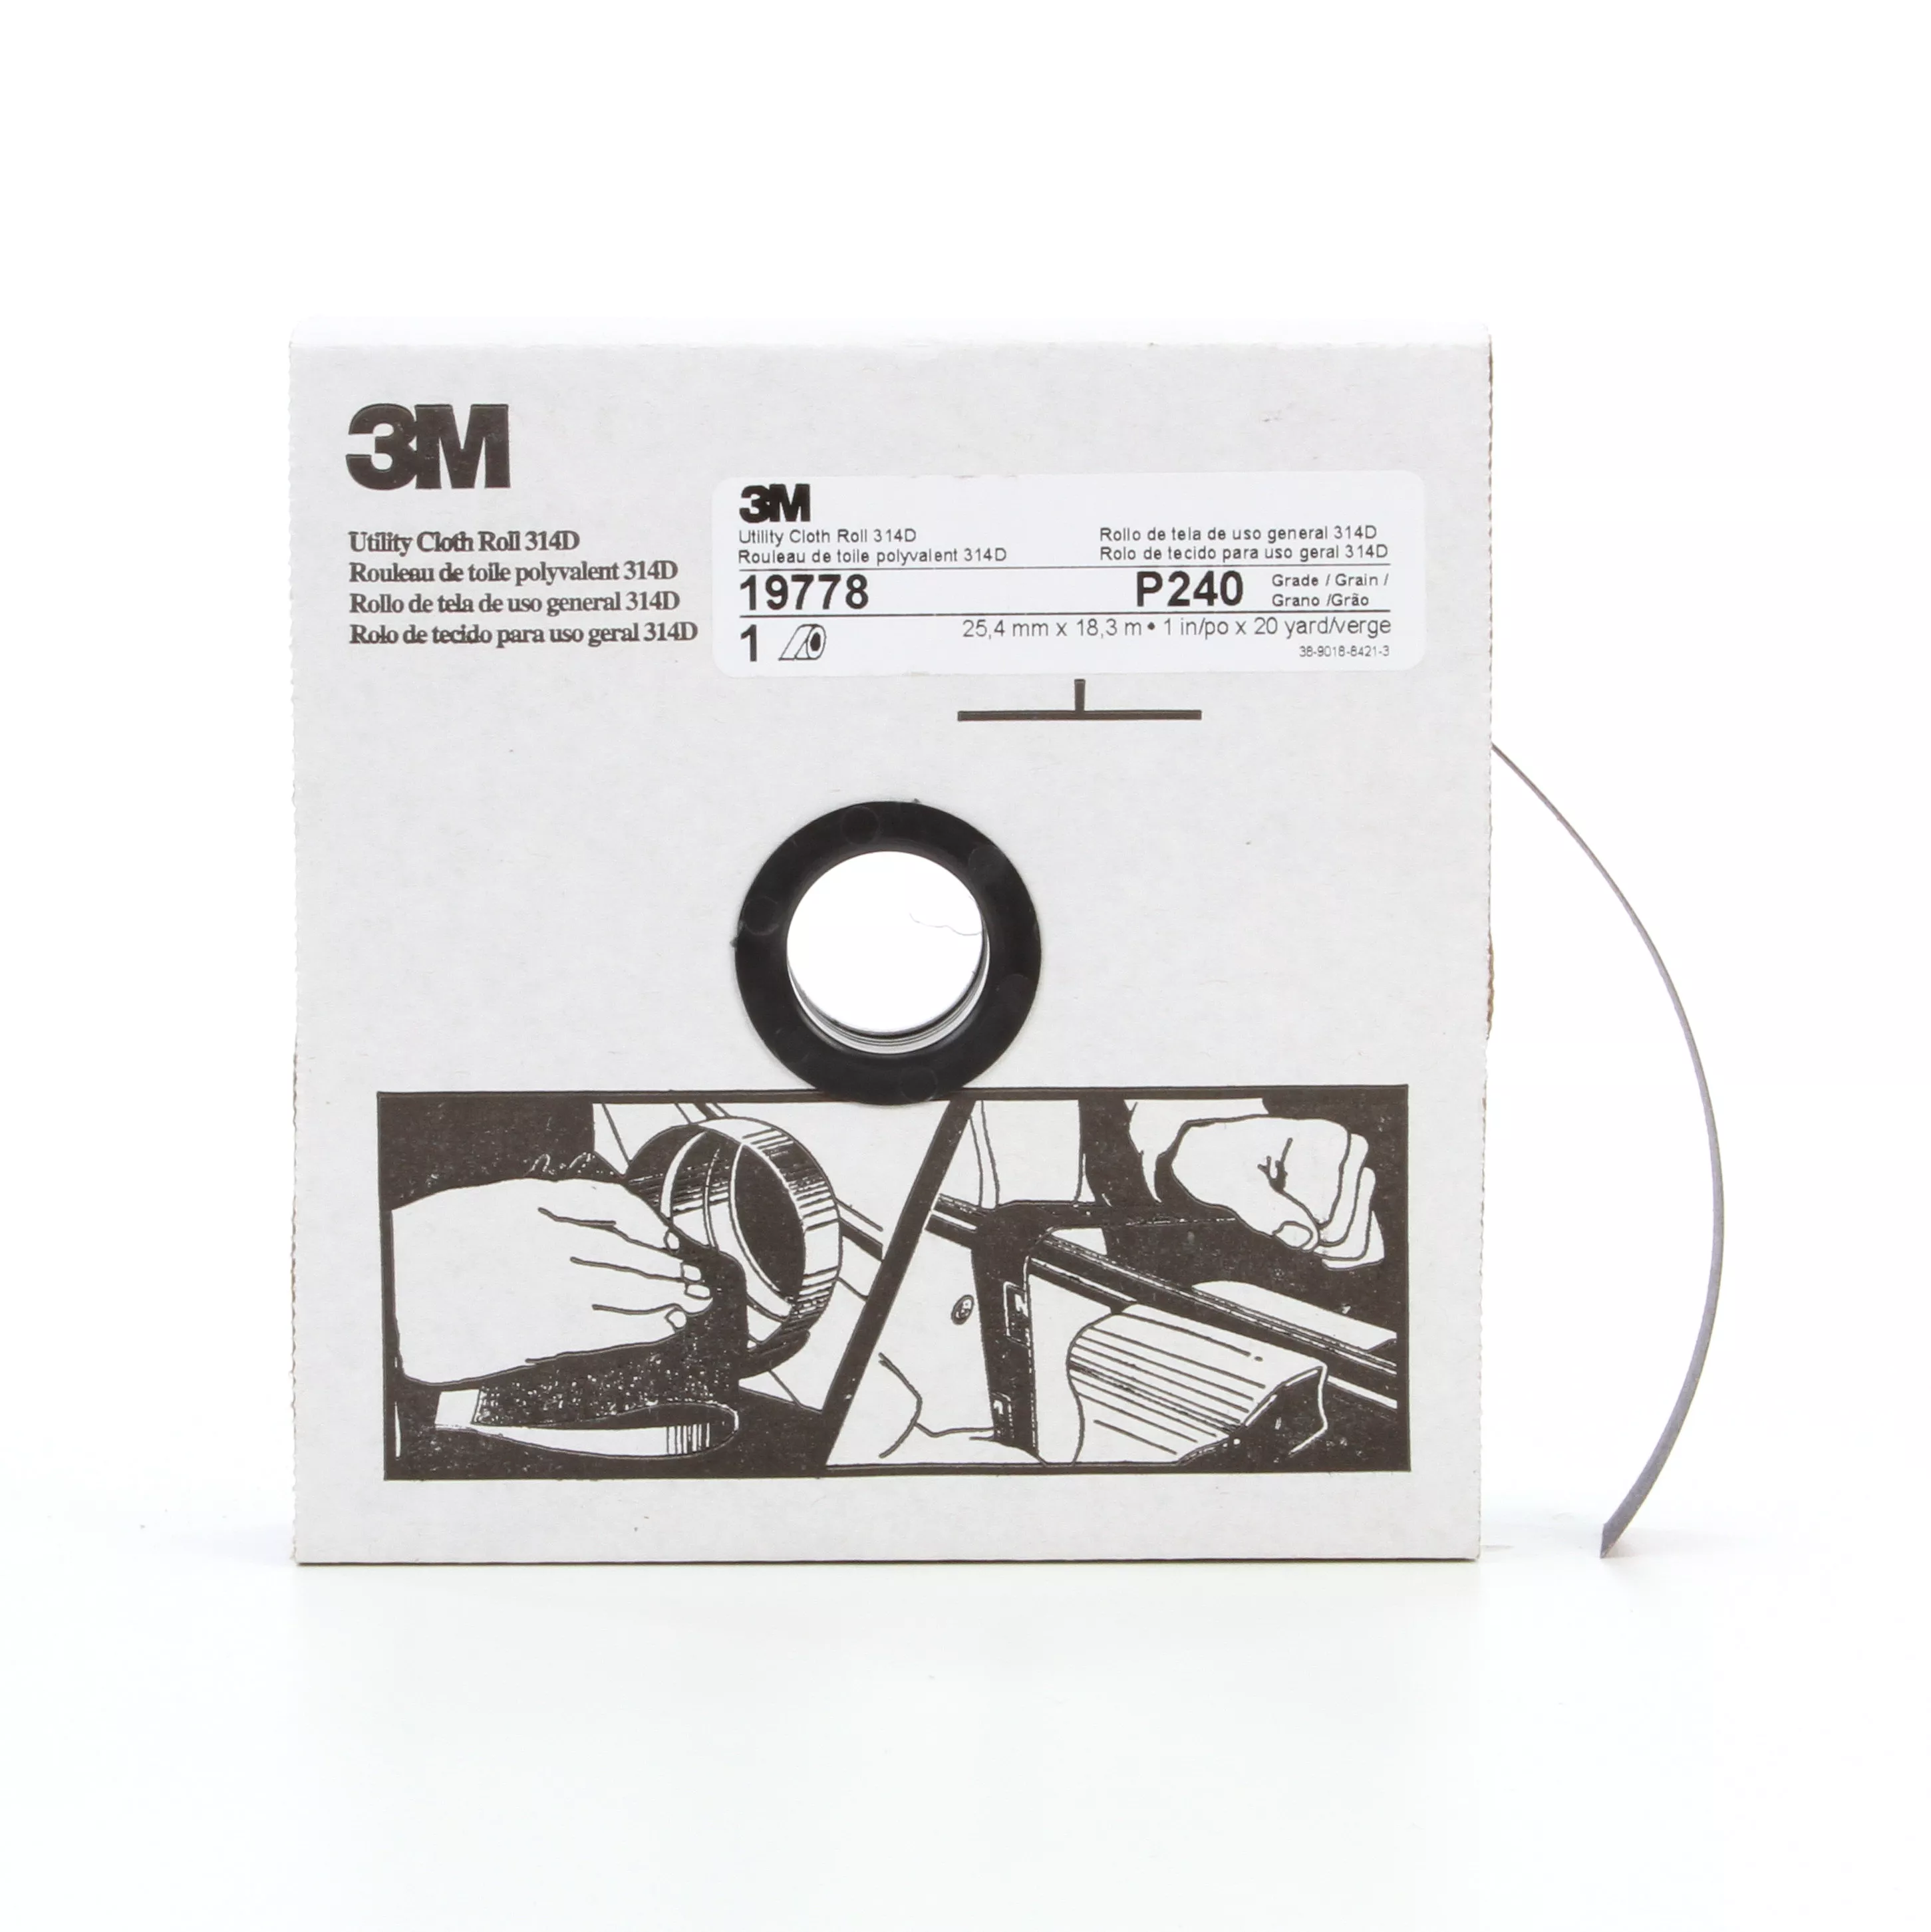 Product Number 314D | 3M™ Utility Cloth Roll 314D